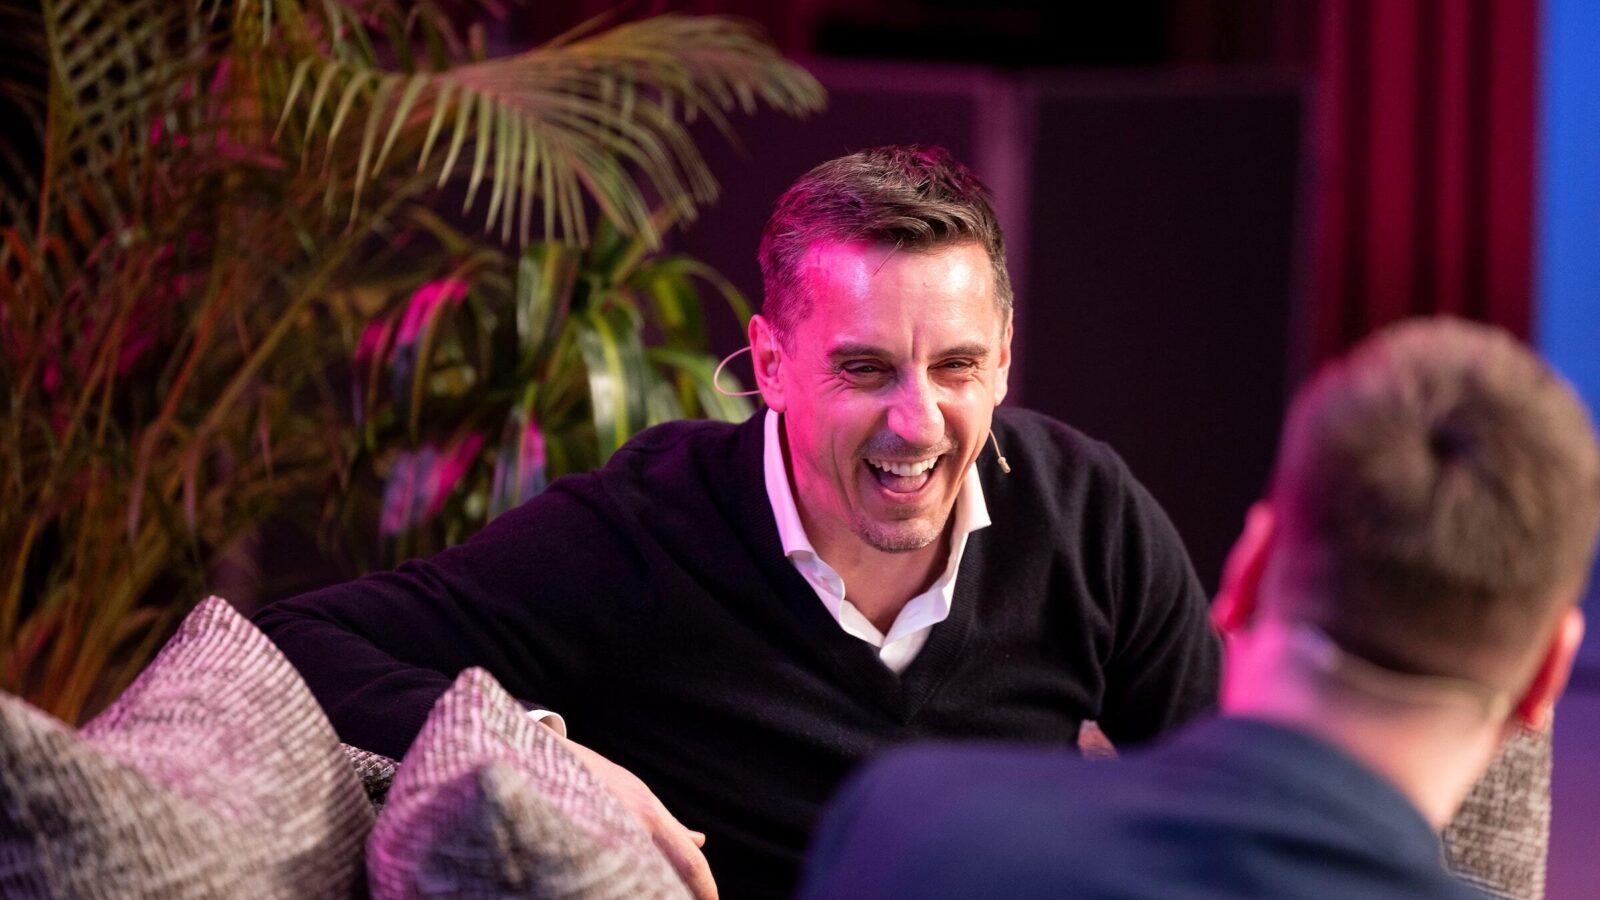 Bank 'signs' Gary Neville to inspire small businesses